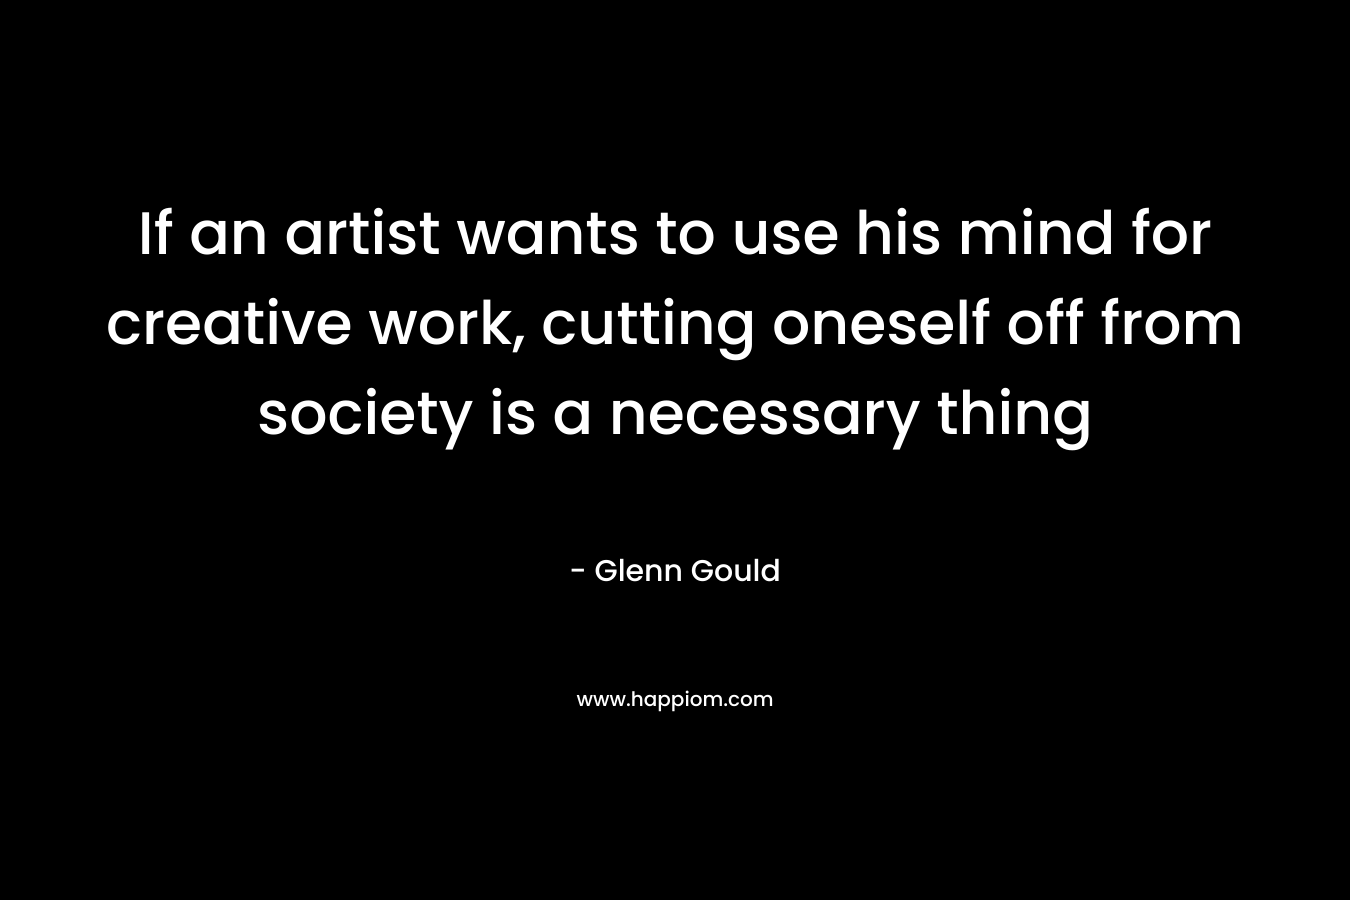 If an artist wants to use his mind for creative work, cutting oneself off from society is a necessary thing